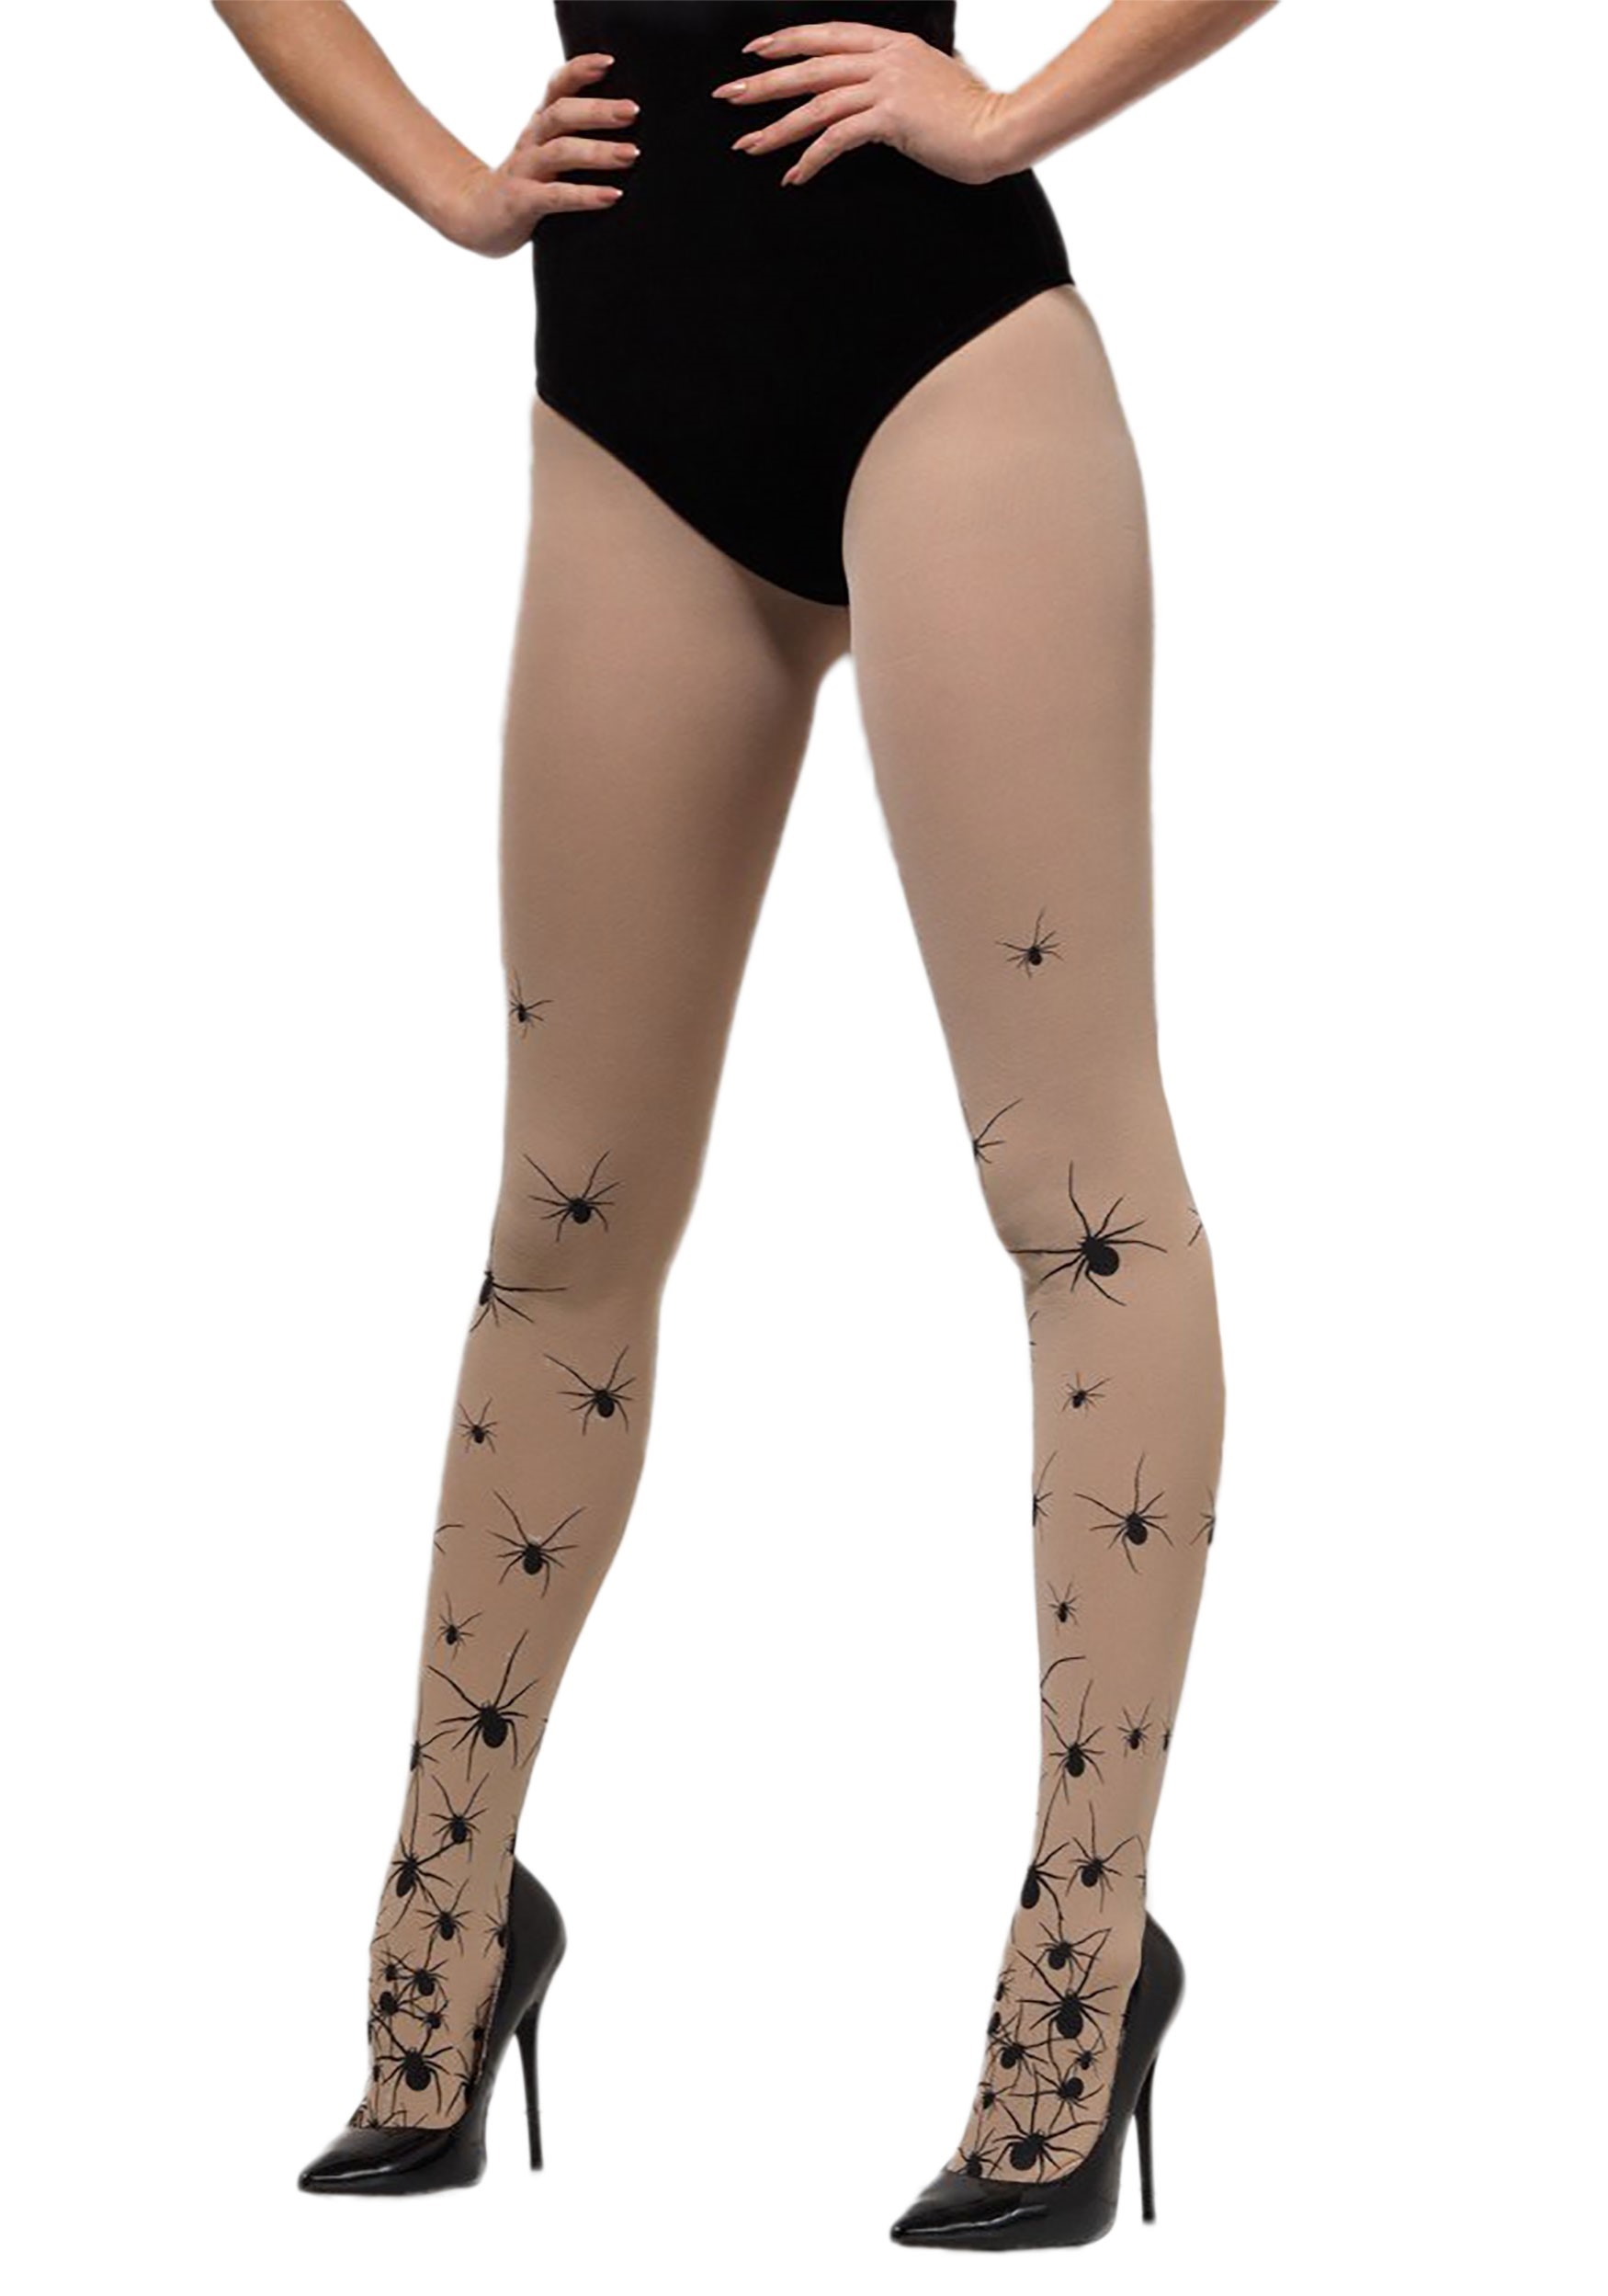 https://images.halloweencostumes.eu/products/58248/1-1/black-womens-spider-tights.jpg